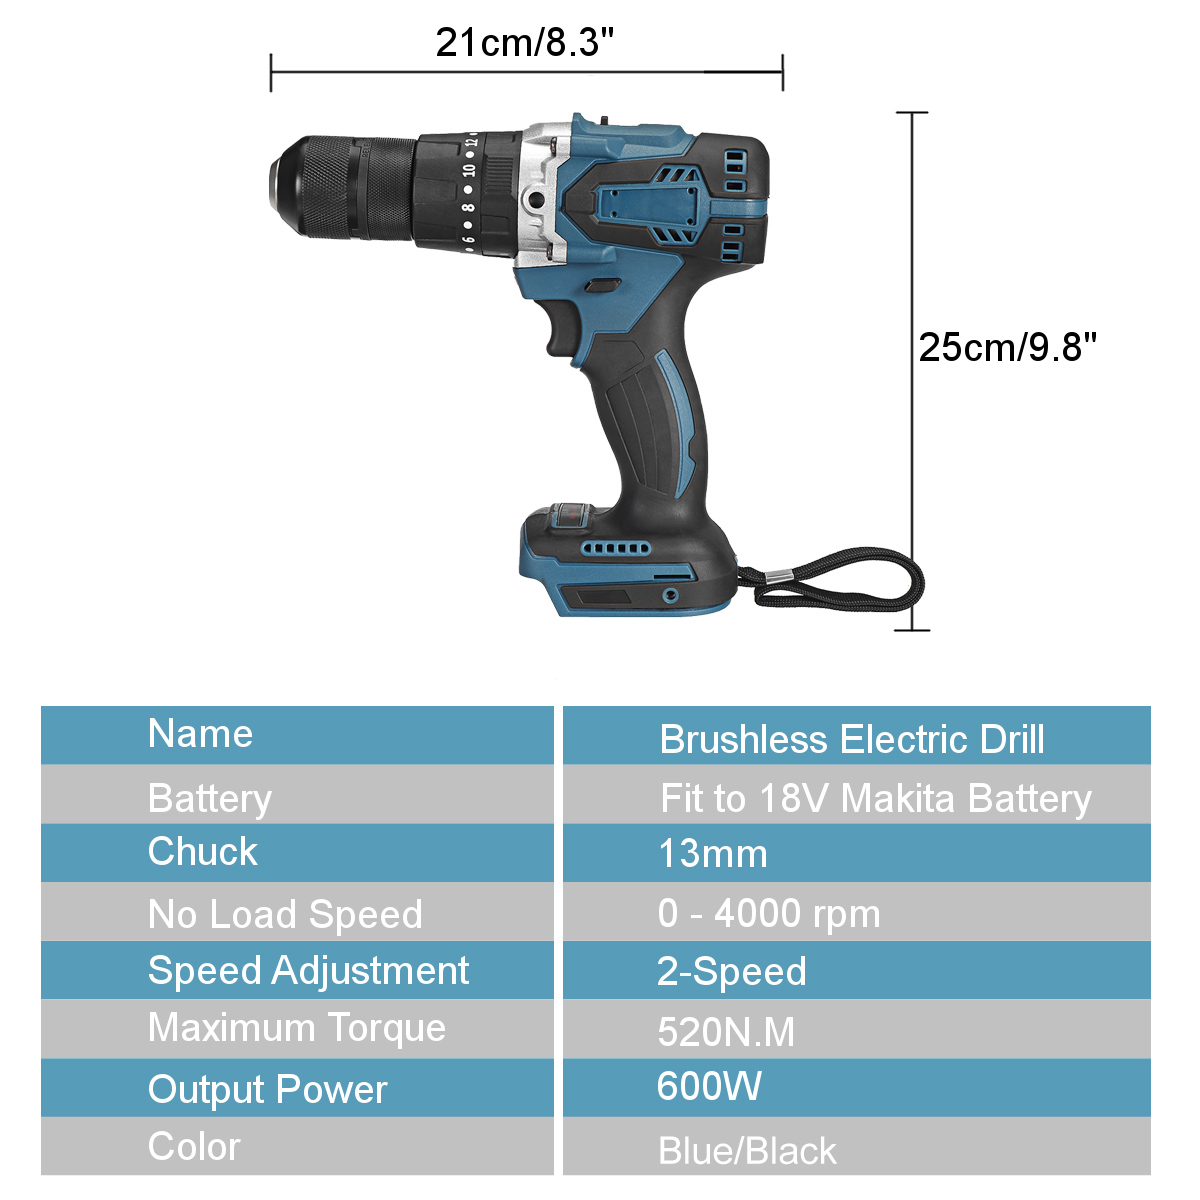 13mm-Chuck-Self-Lock-3-In-1-Brushless-Electric-Drill-20-Torque-2-Speed-Rechargeable-Power-Drills-Dri-1880980-12